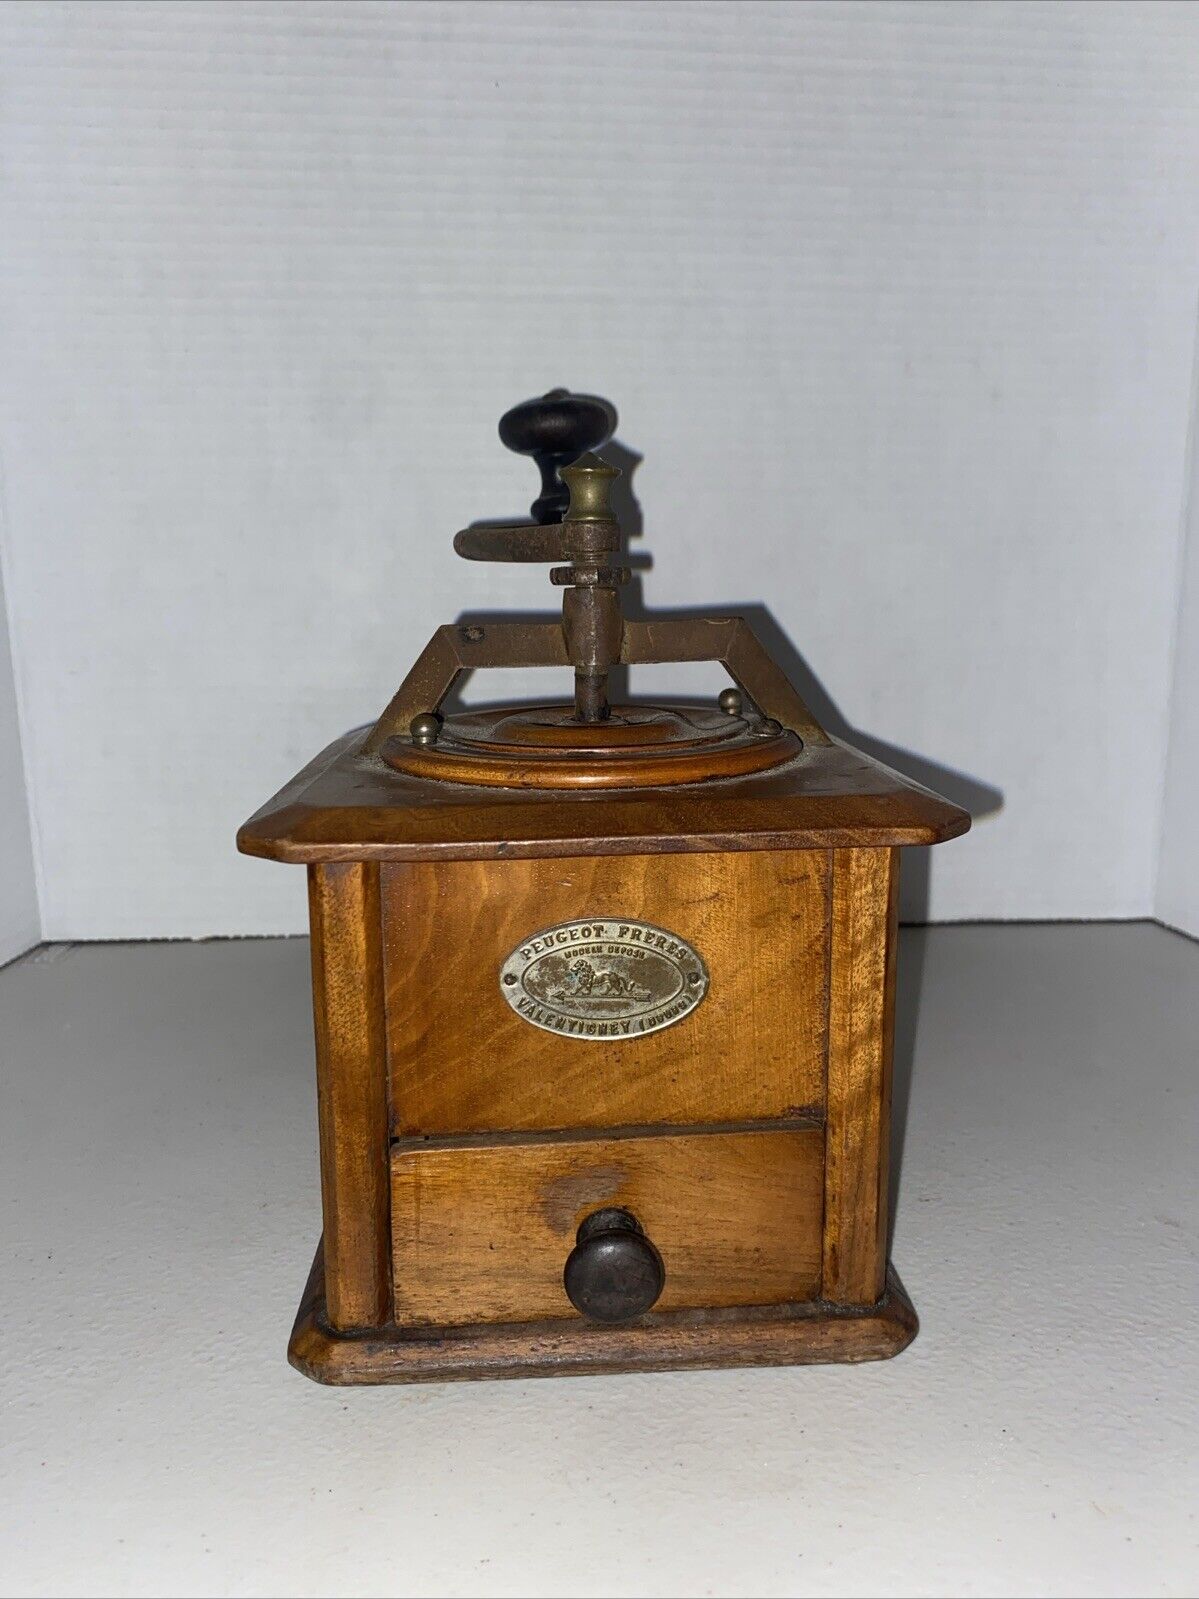 Antique Peugeot Freres Valentigney Coffee Grinder / Mill, Made in France